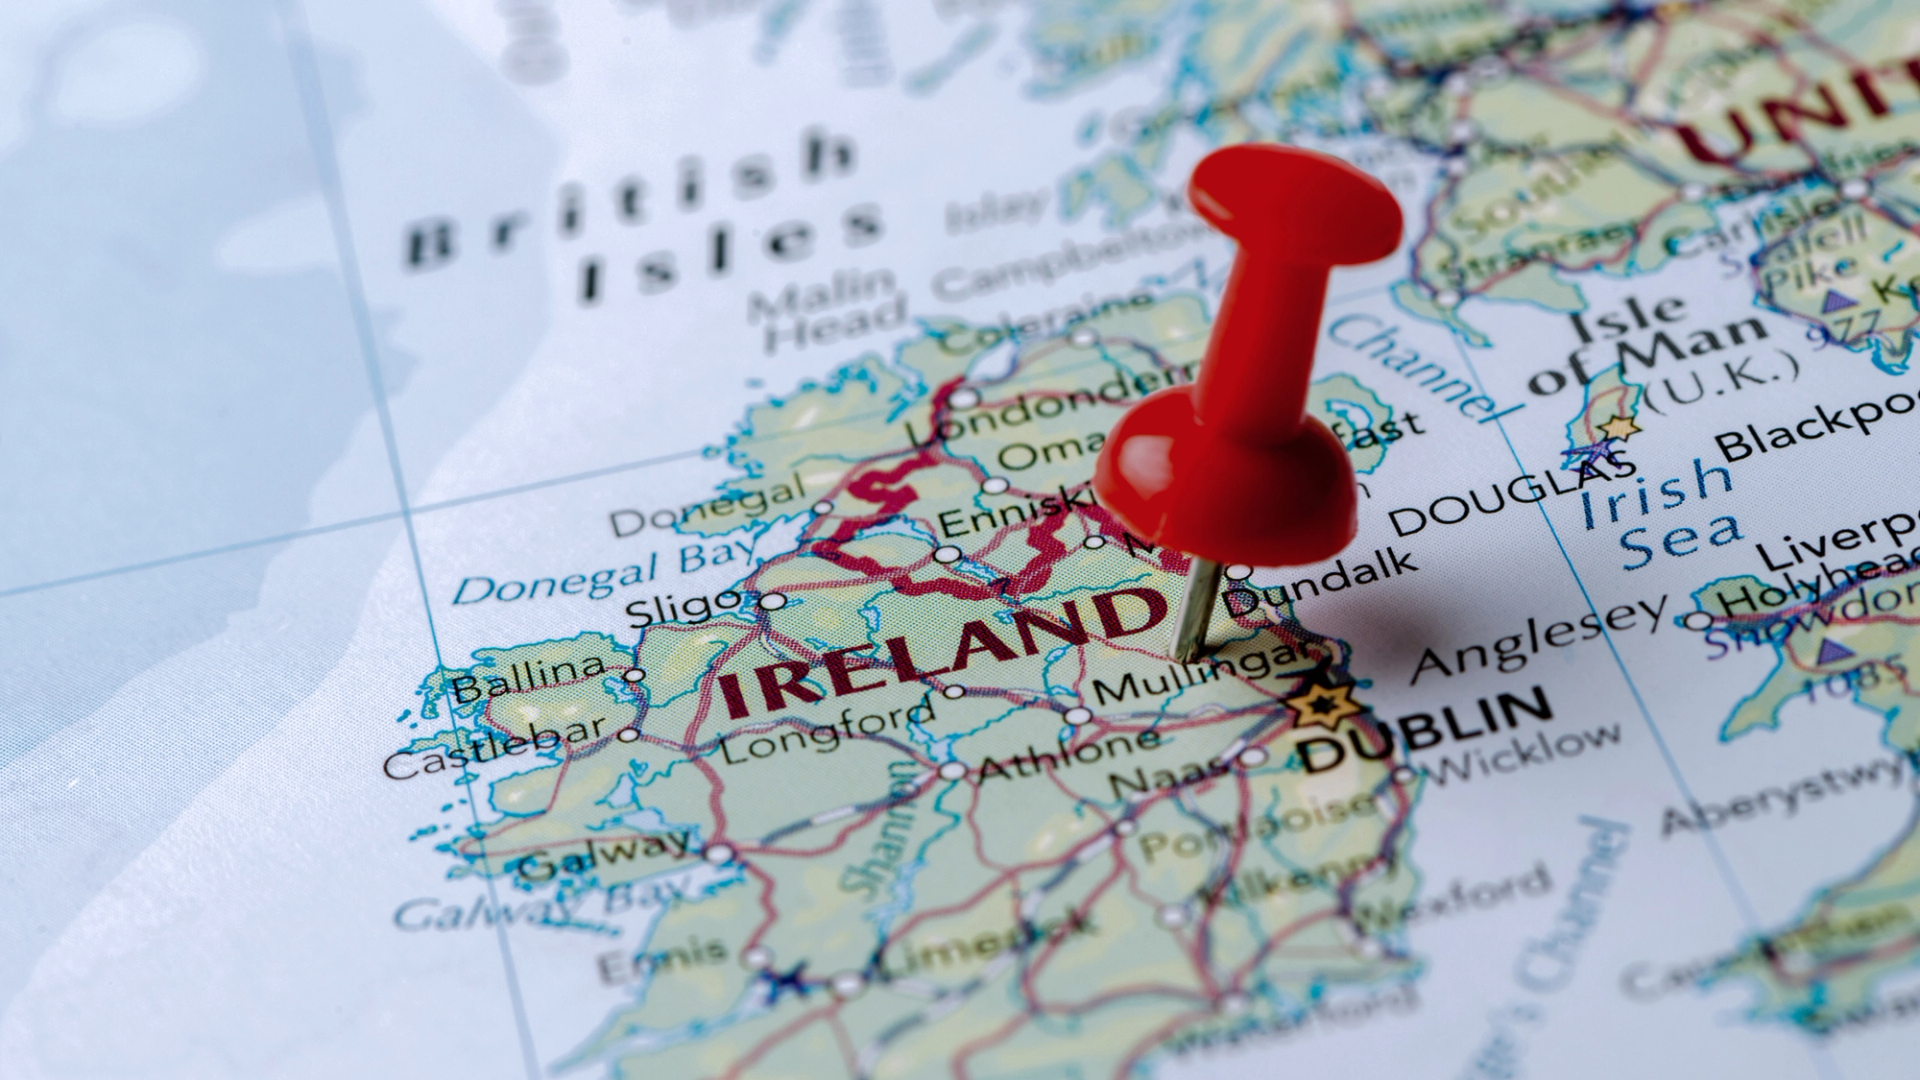 Image of a map showing Ireland and a red pin